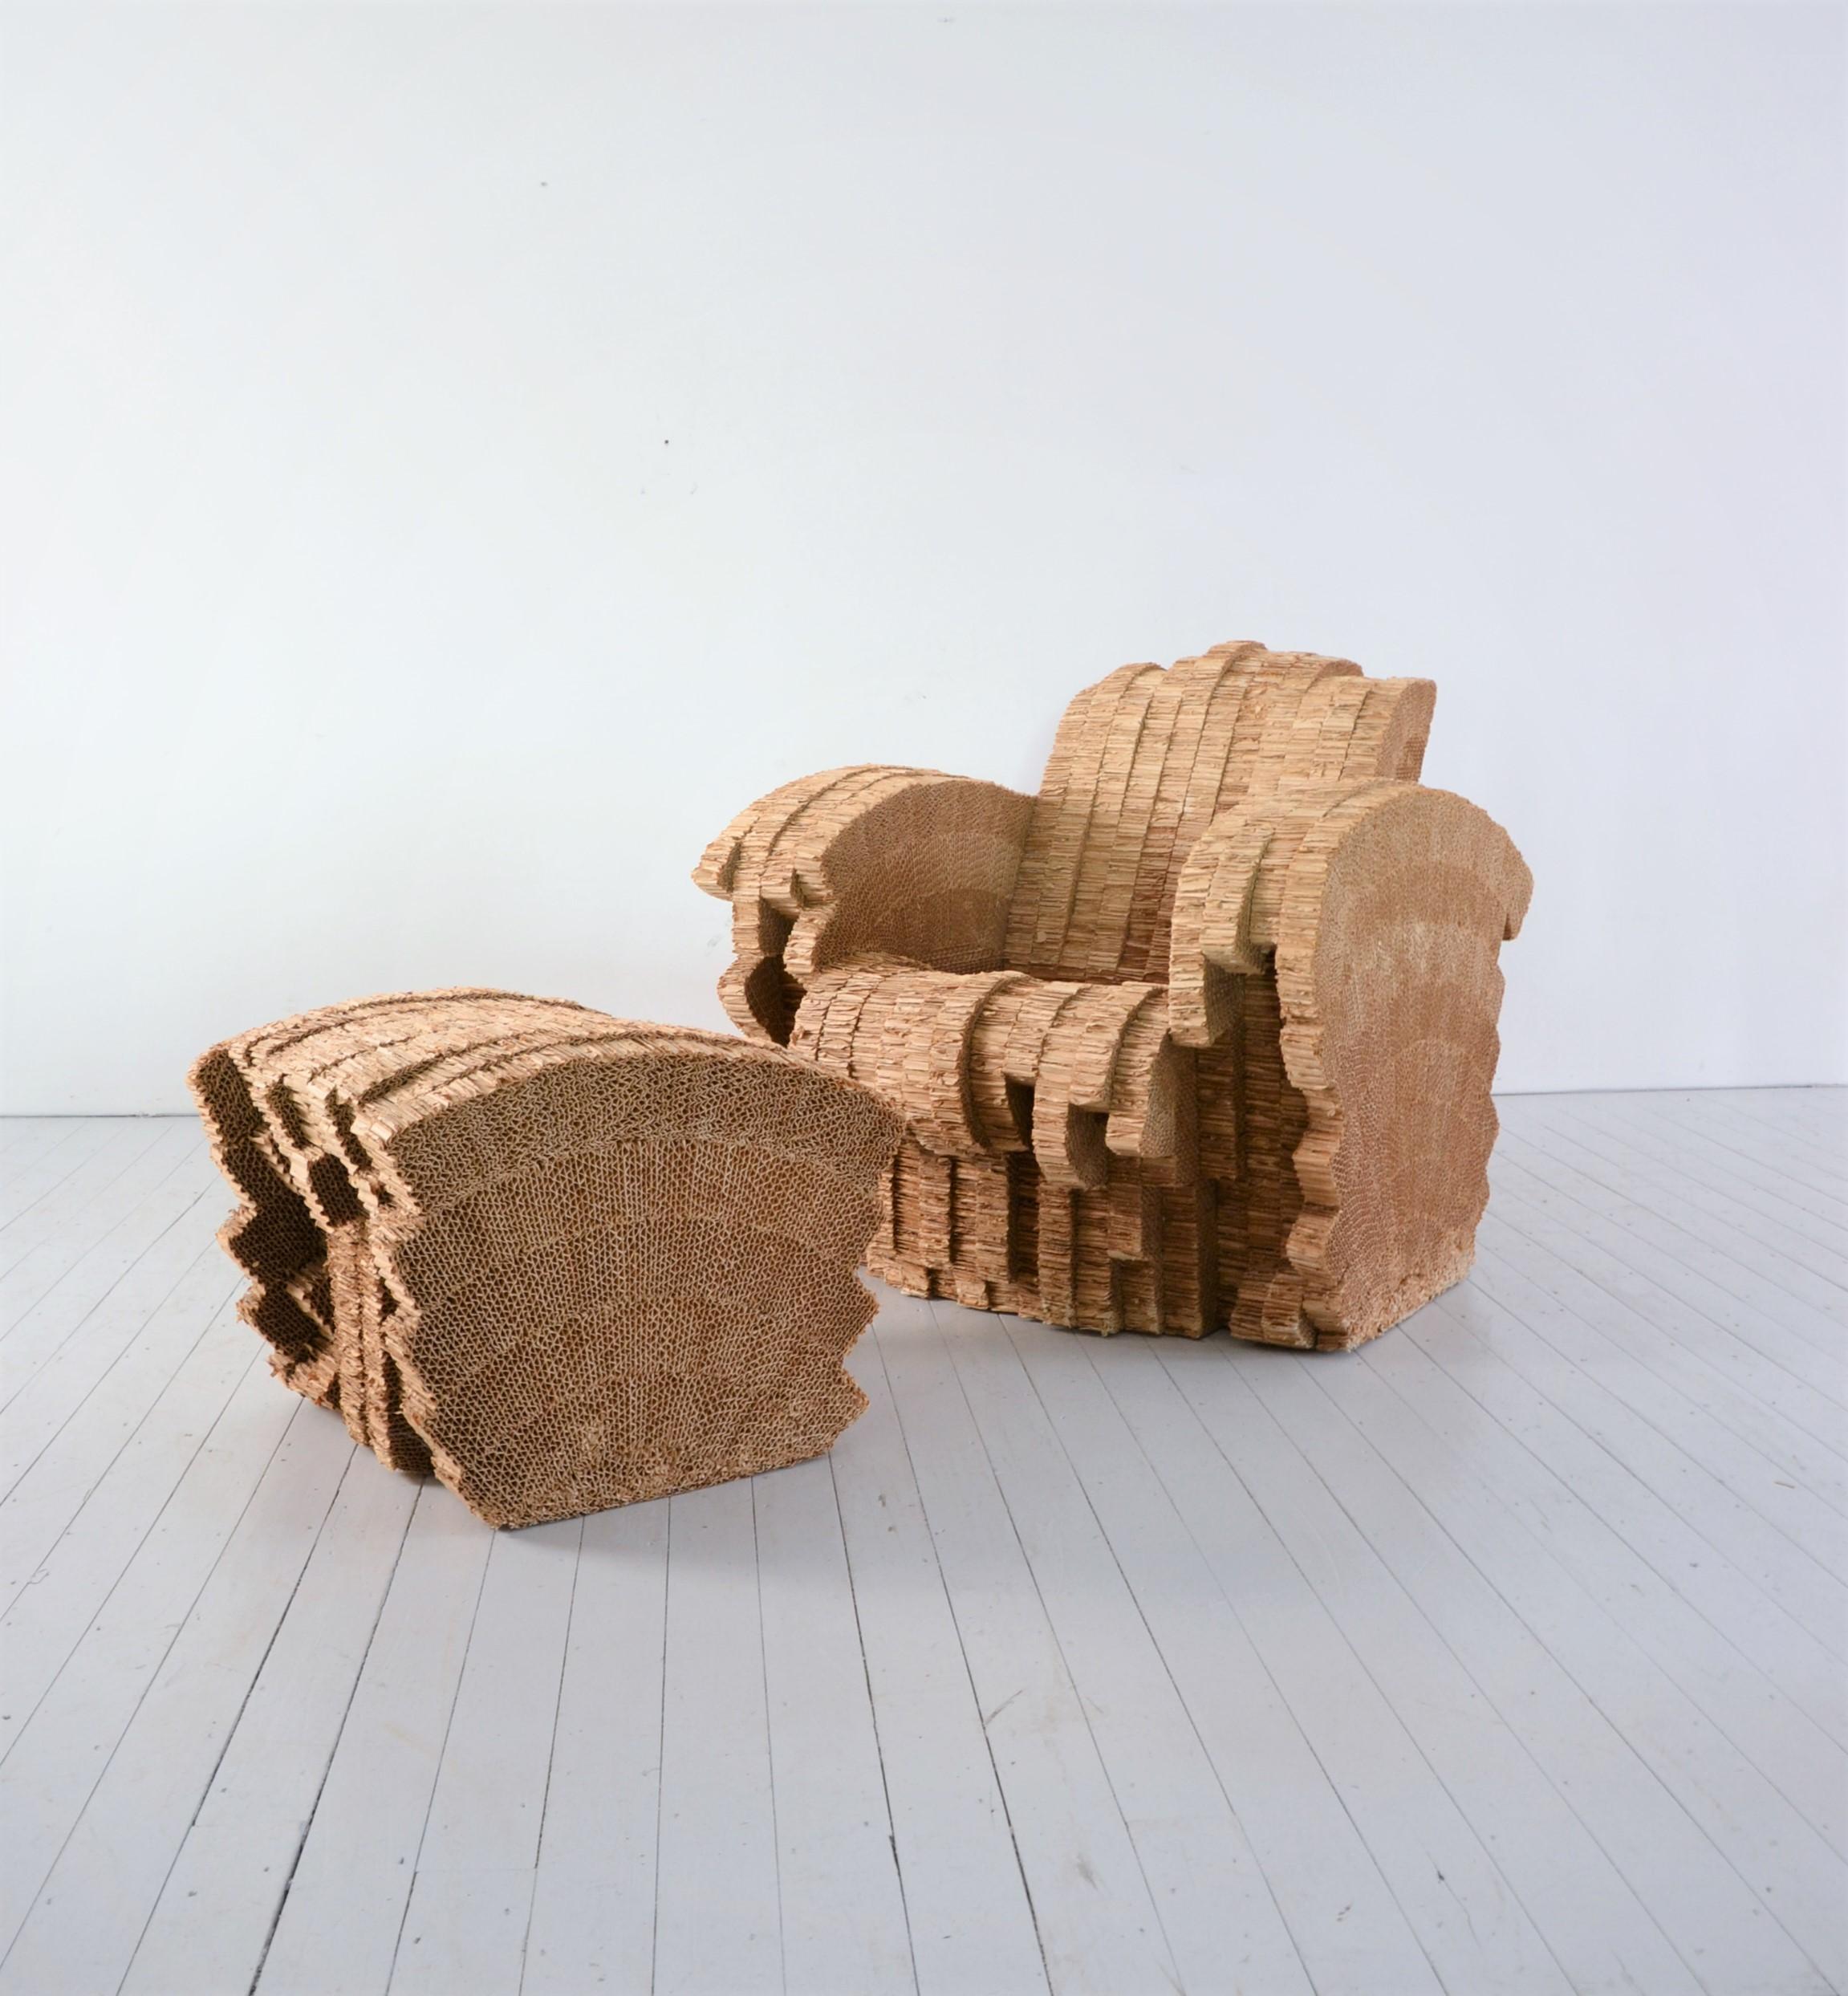 Laminated and cut cardboard designed chair and ottoman designed by noted architect Frank O. Gehry and manufactured by VITRA- Edition of 100 Pieces.
Both pieces has a brass signature and numbered by vitra.